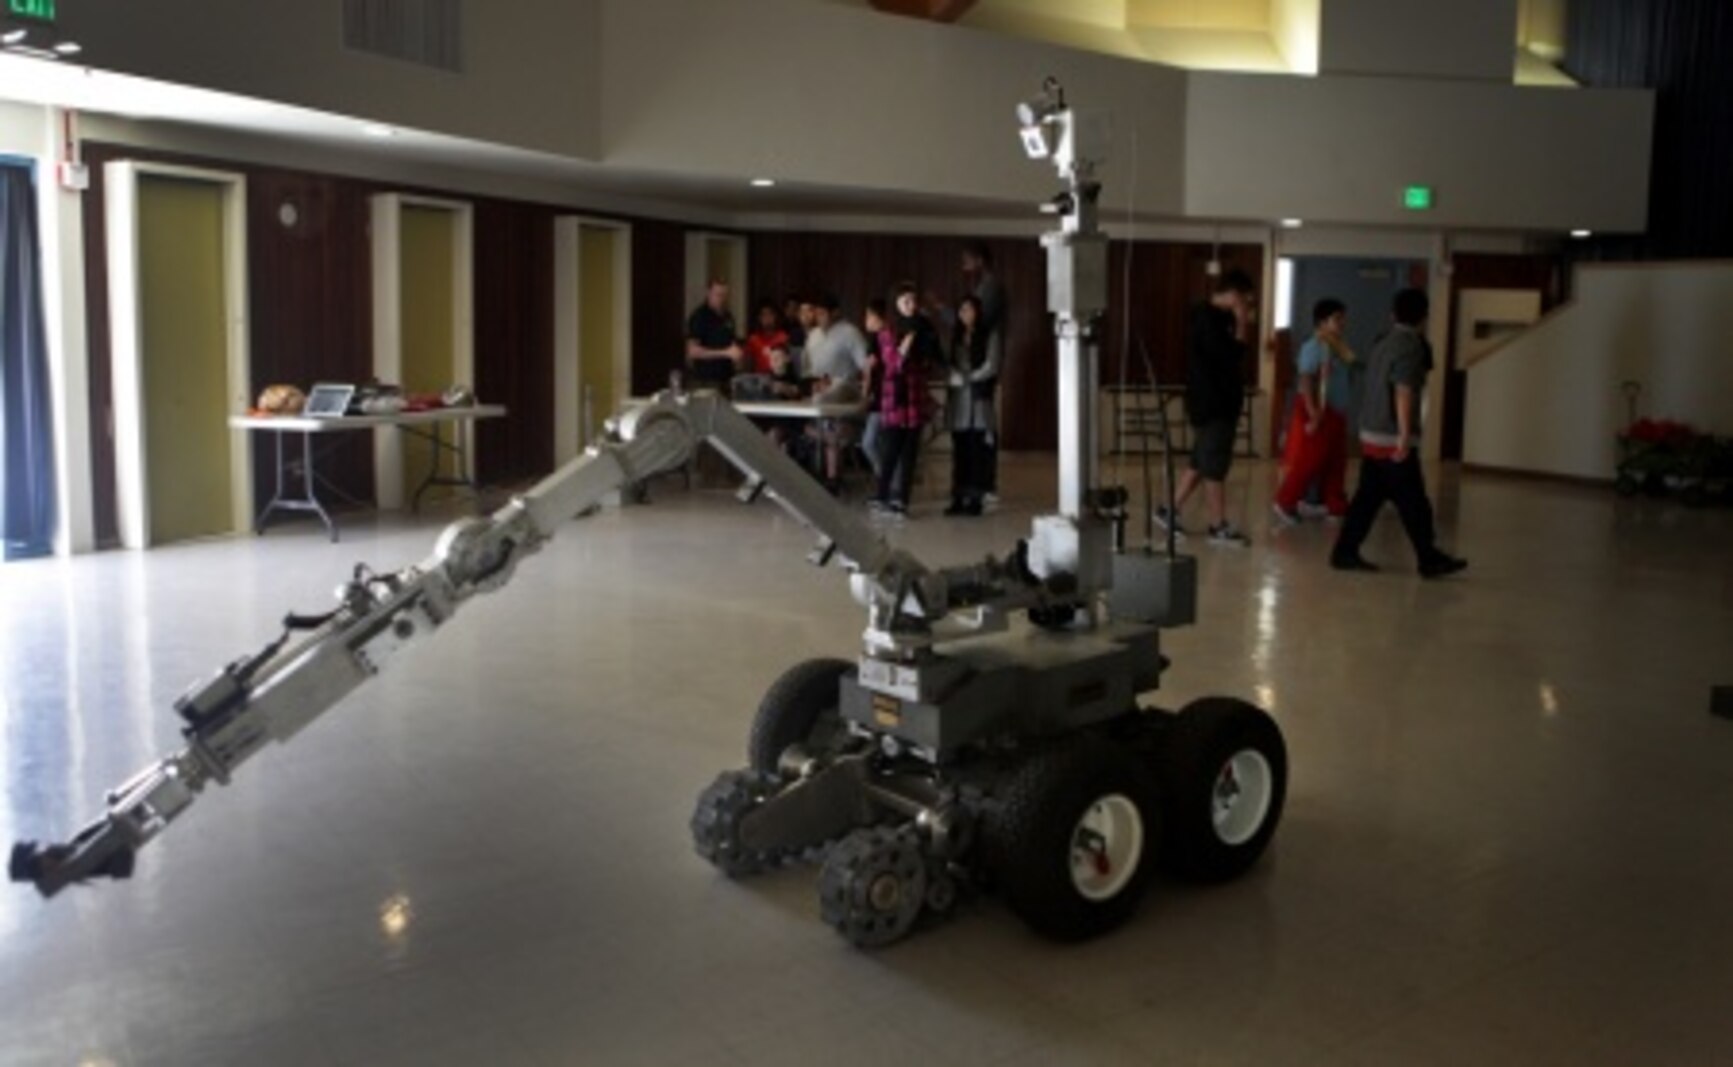 Explosive Ordnance Disposal technicians with 1st EOD Co., 7th Engineer Support Battalion, 1st Marine Logistics Group, showcase the mechanics of the ANDROS EOD robot to James E. Potter Junior High School students during a visit to the school in Fallbrook, Calif., Feb. 29, 2016. During the visit, EOD Marines explained the various capabilities of military robots and performed a practical application of EOD’s bomb-detecting robots.